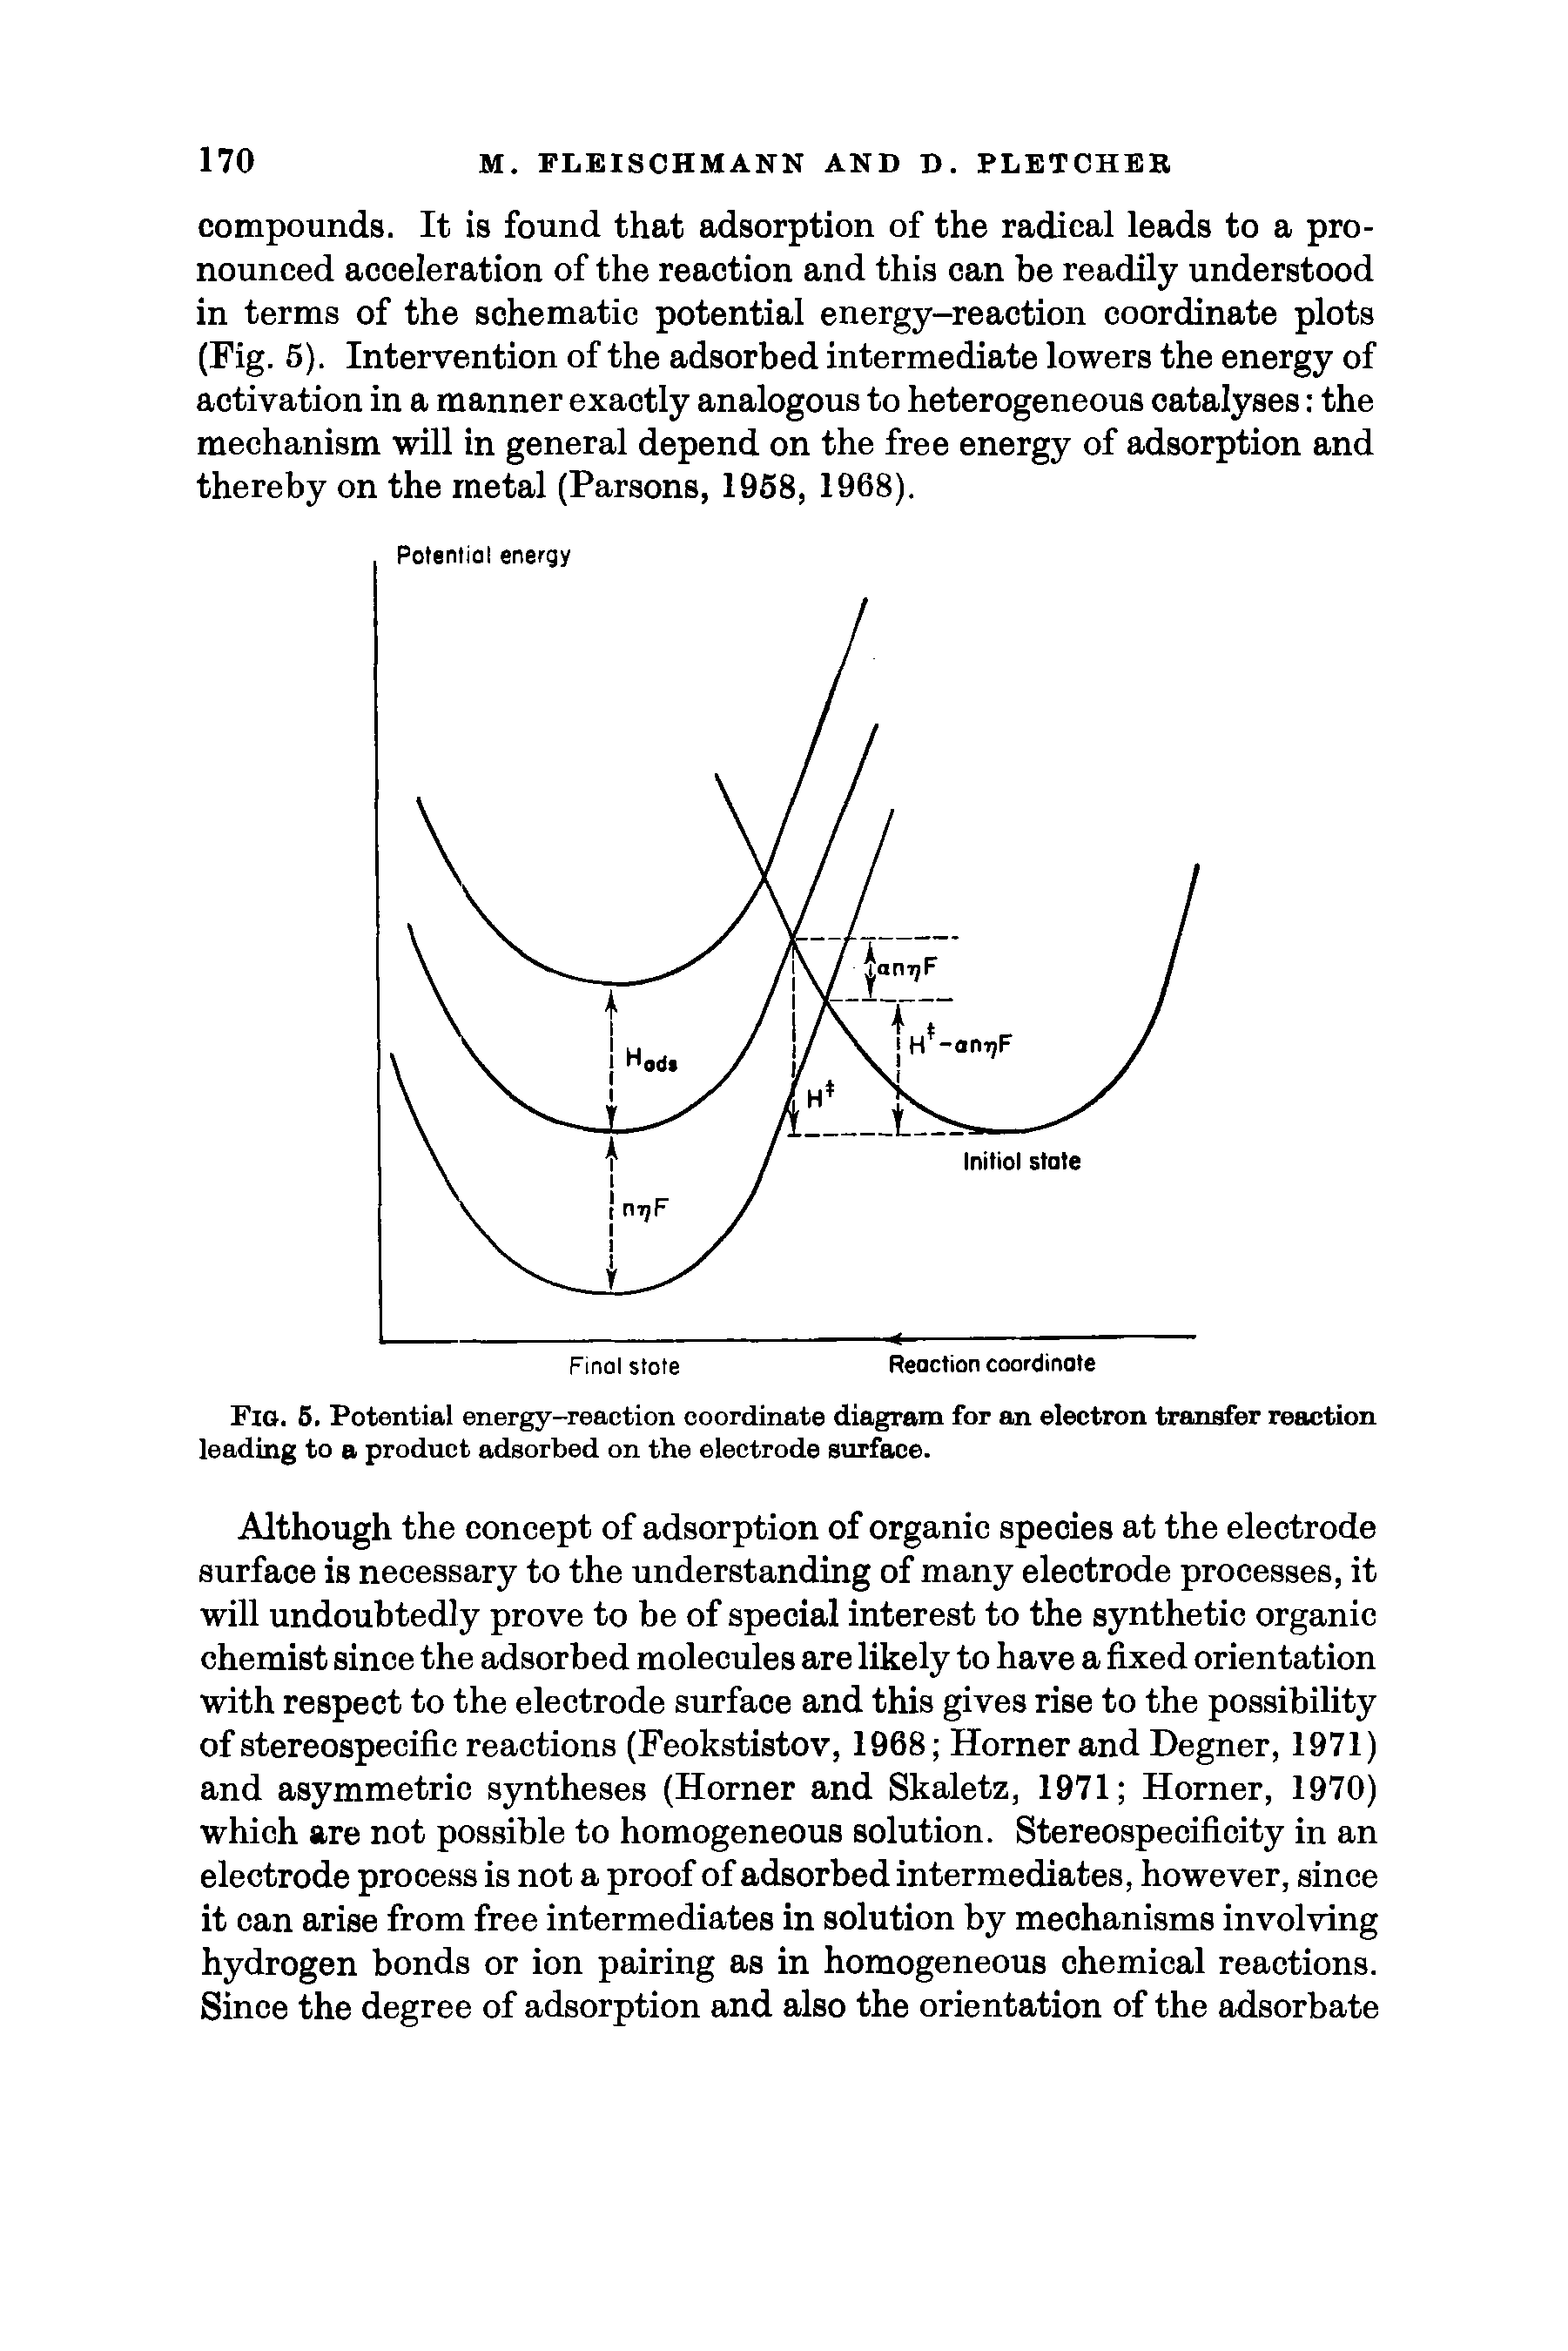 Fig. 5. Potential energy-reaction coordinate diagram for an electron transfer reaction leading to a product adsorbed on the electrode surface.